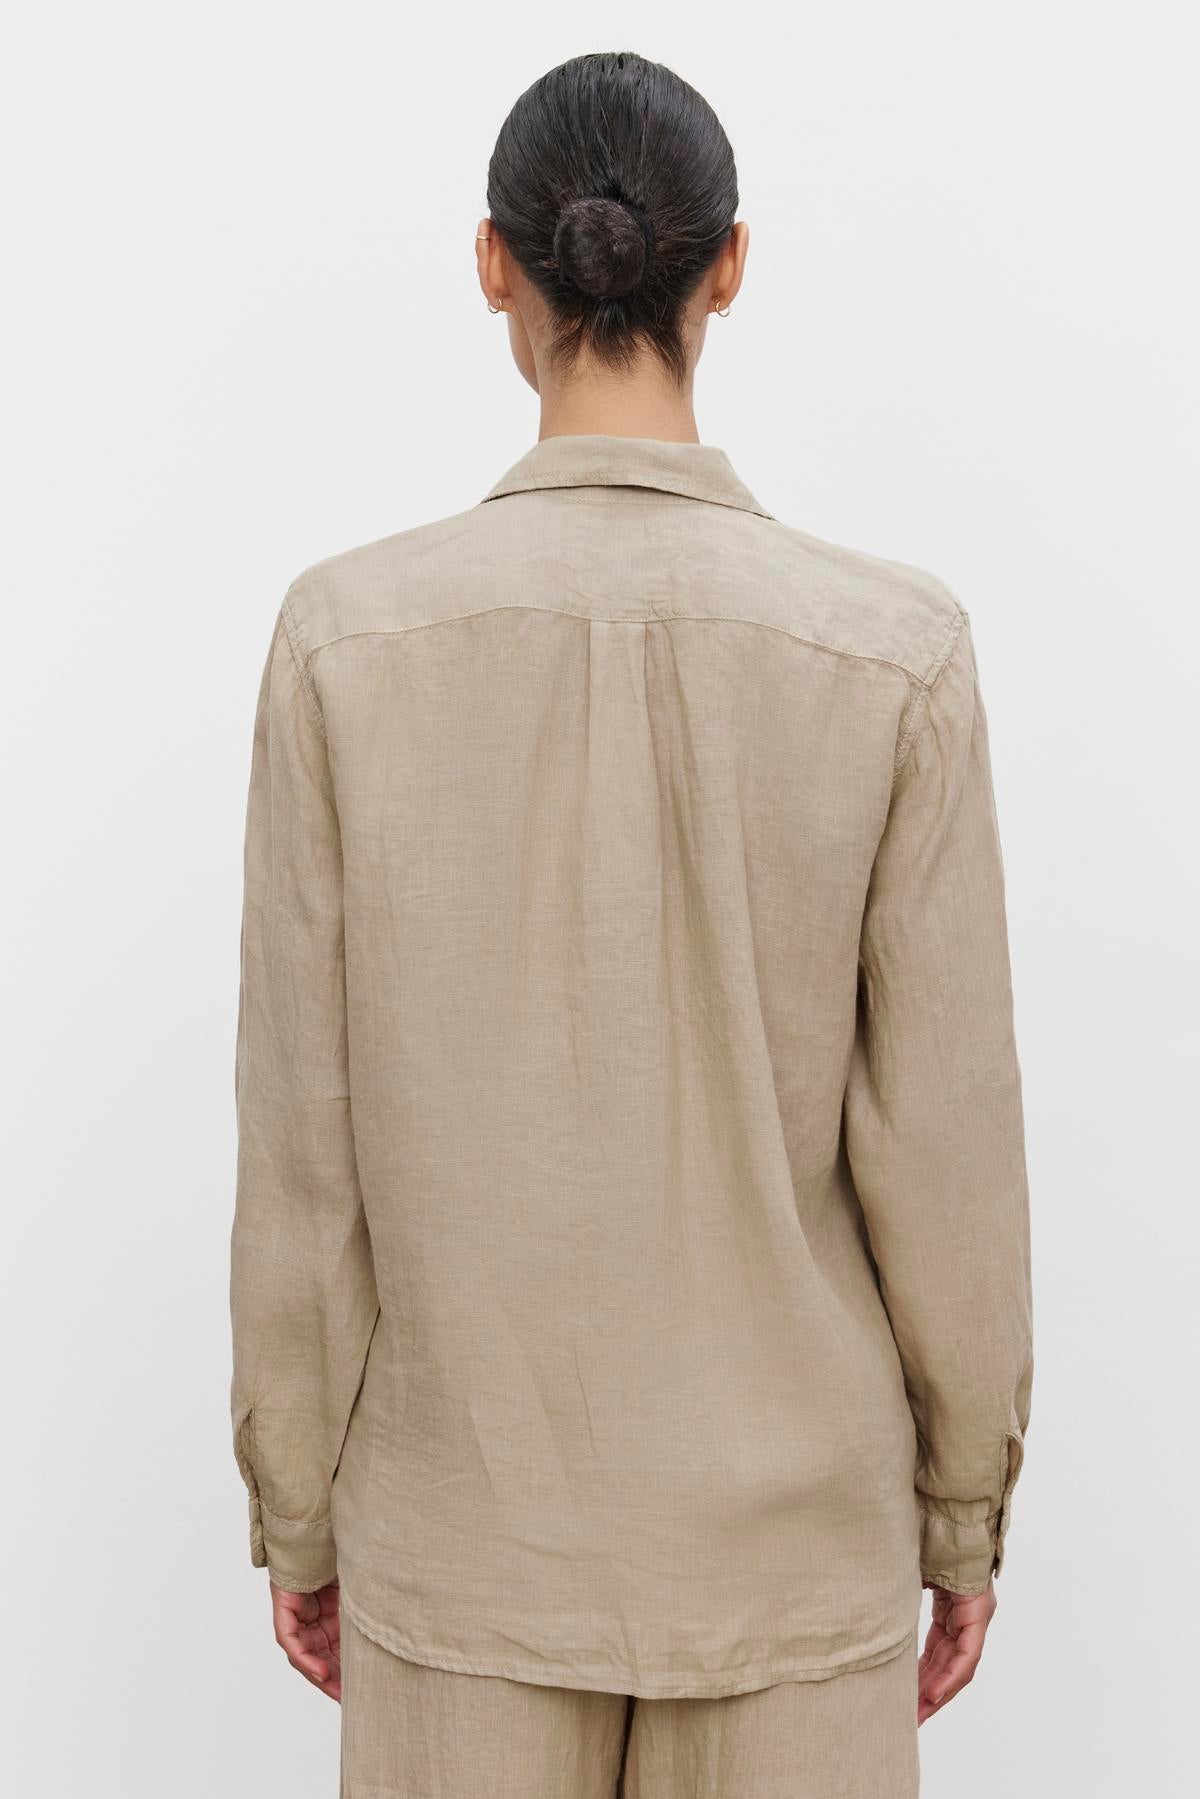   A person with hair in a bun is seen from the back, wearing a beige, long-sleeved MULHOLLAND LINEN SHIRT by Velvet by Jenny Graham with a relaxed silhouette, standing against a plain white background. 